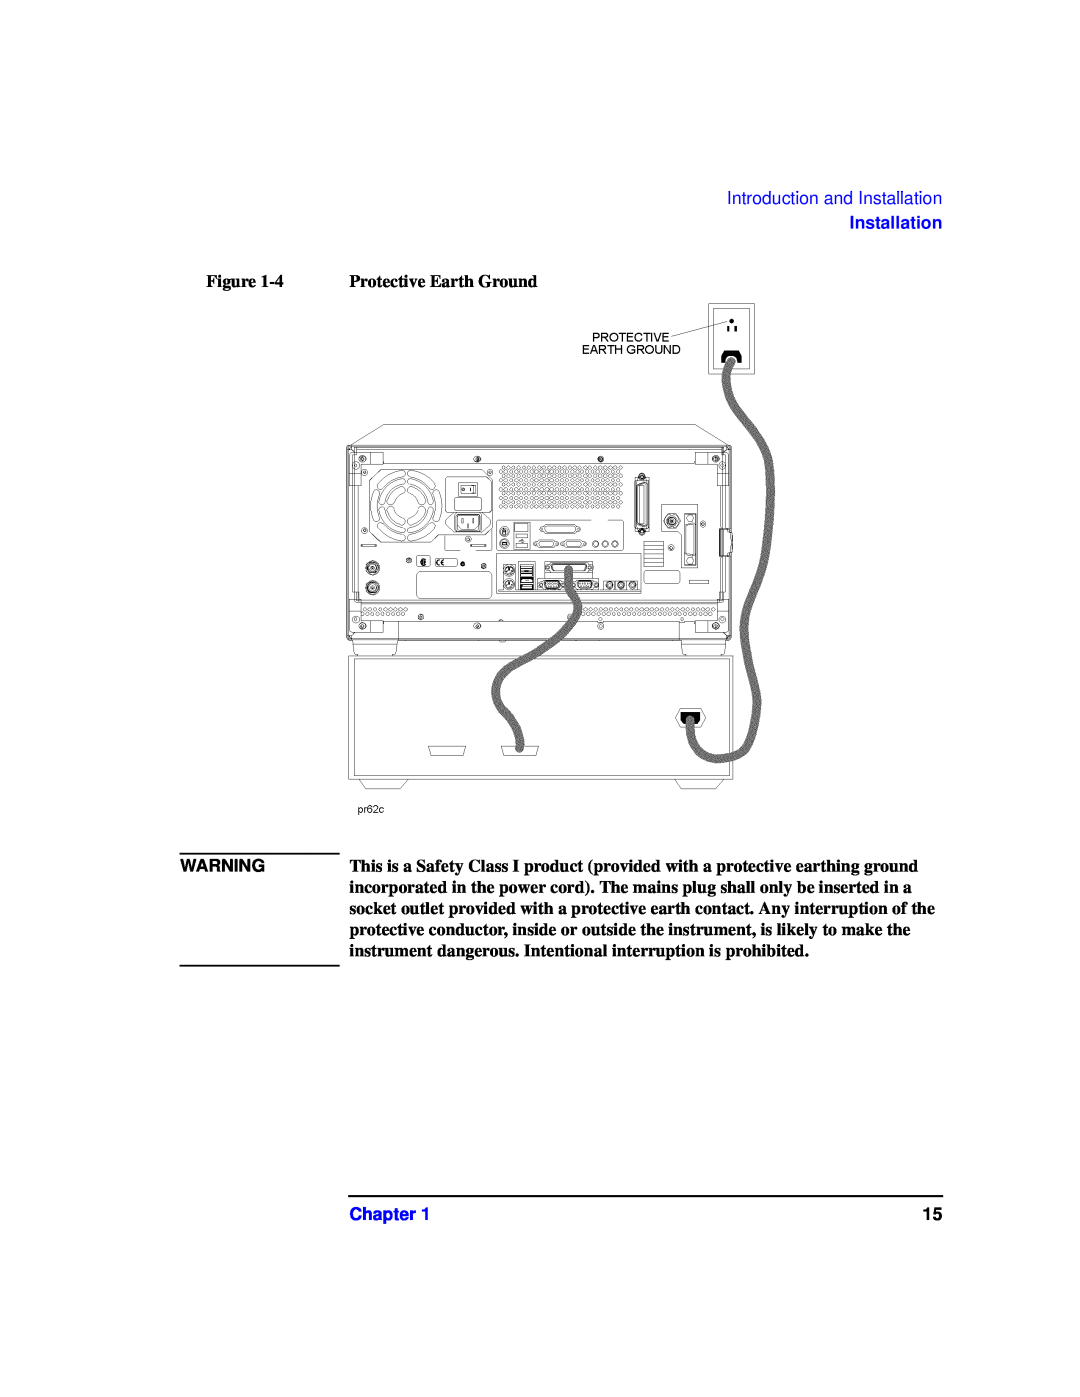 Agilent Technologies 87075C manual Introduction and Installation, Protective Earth Ground, Chapter 